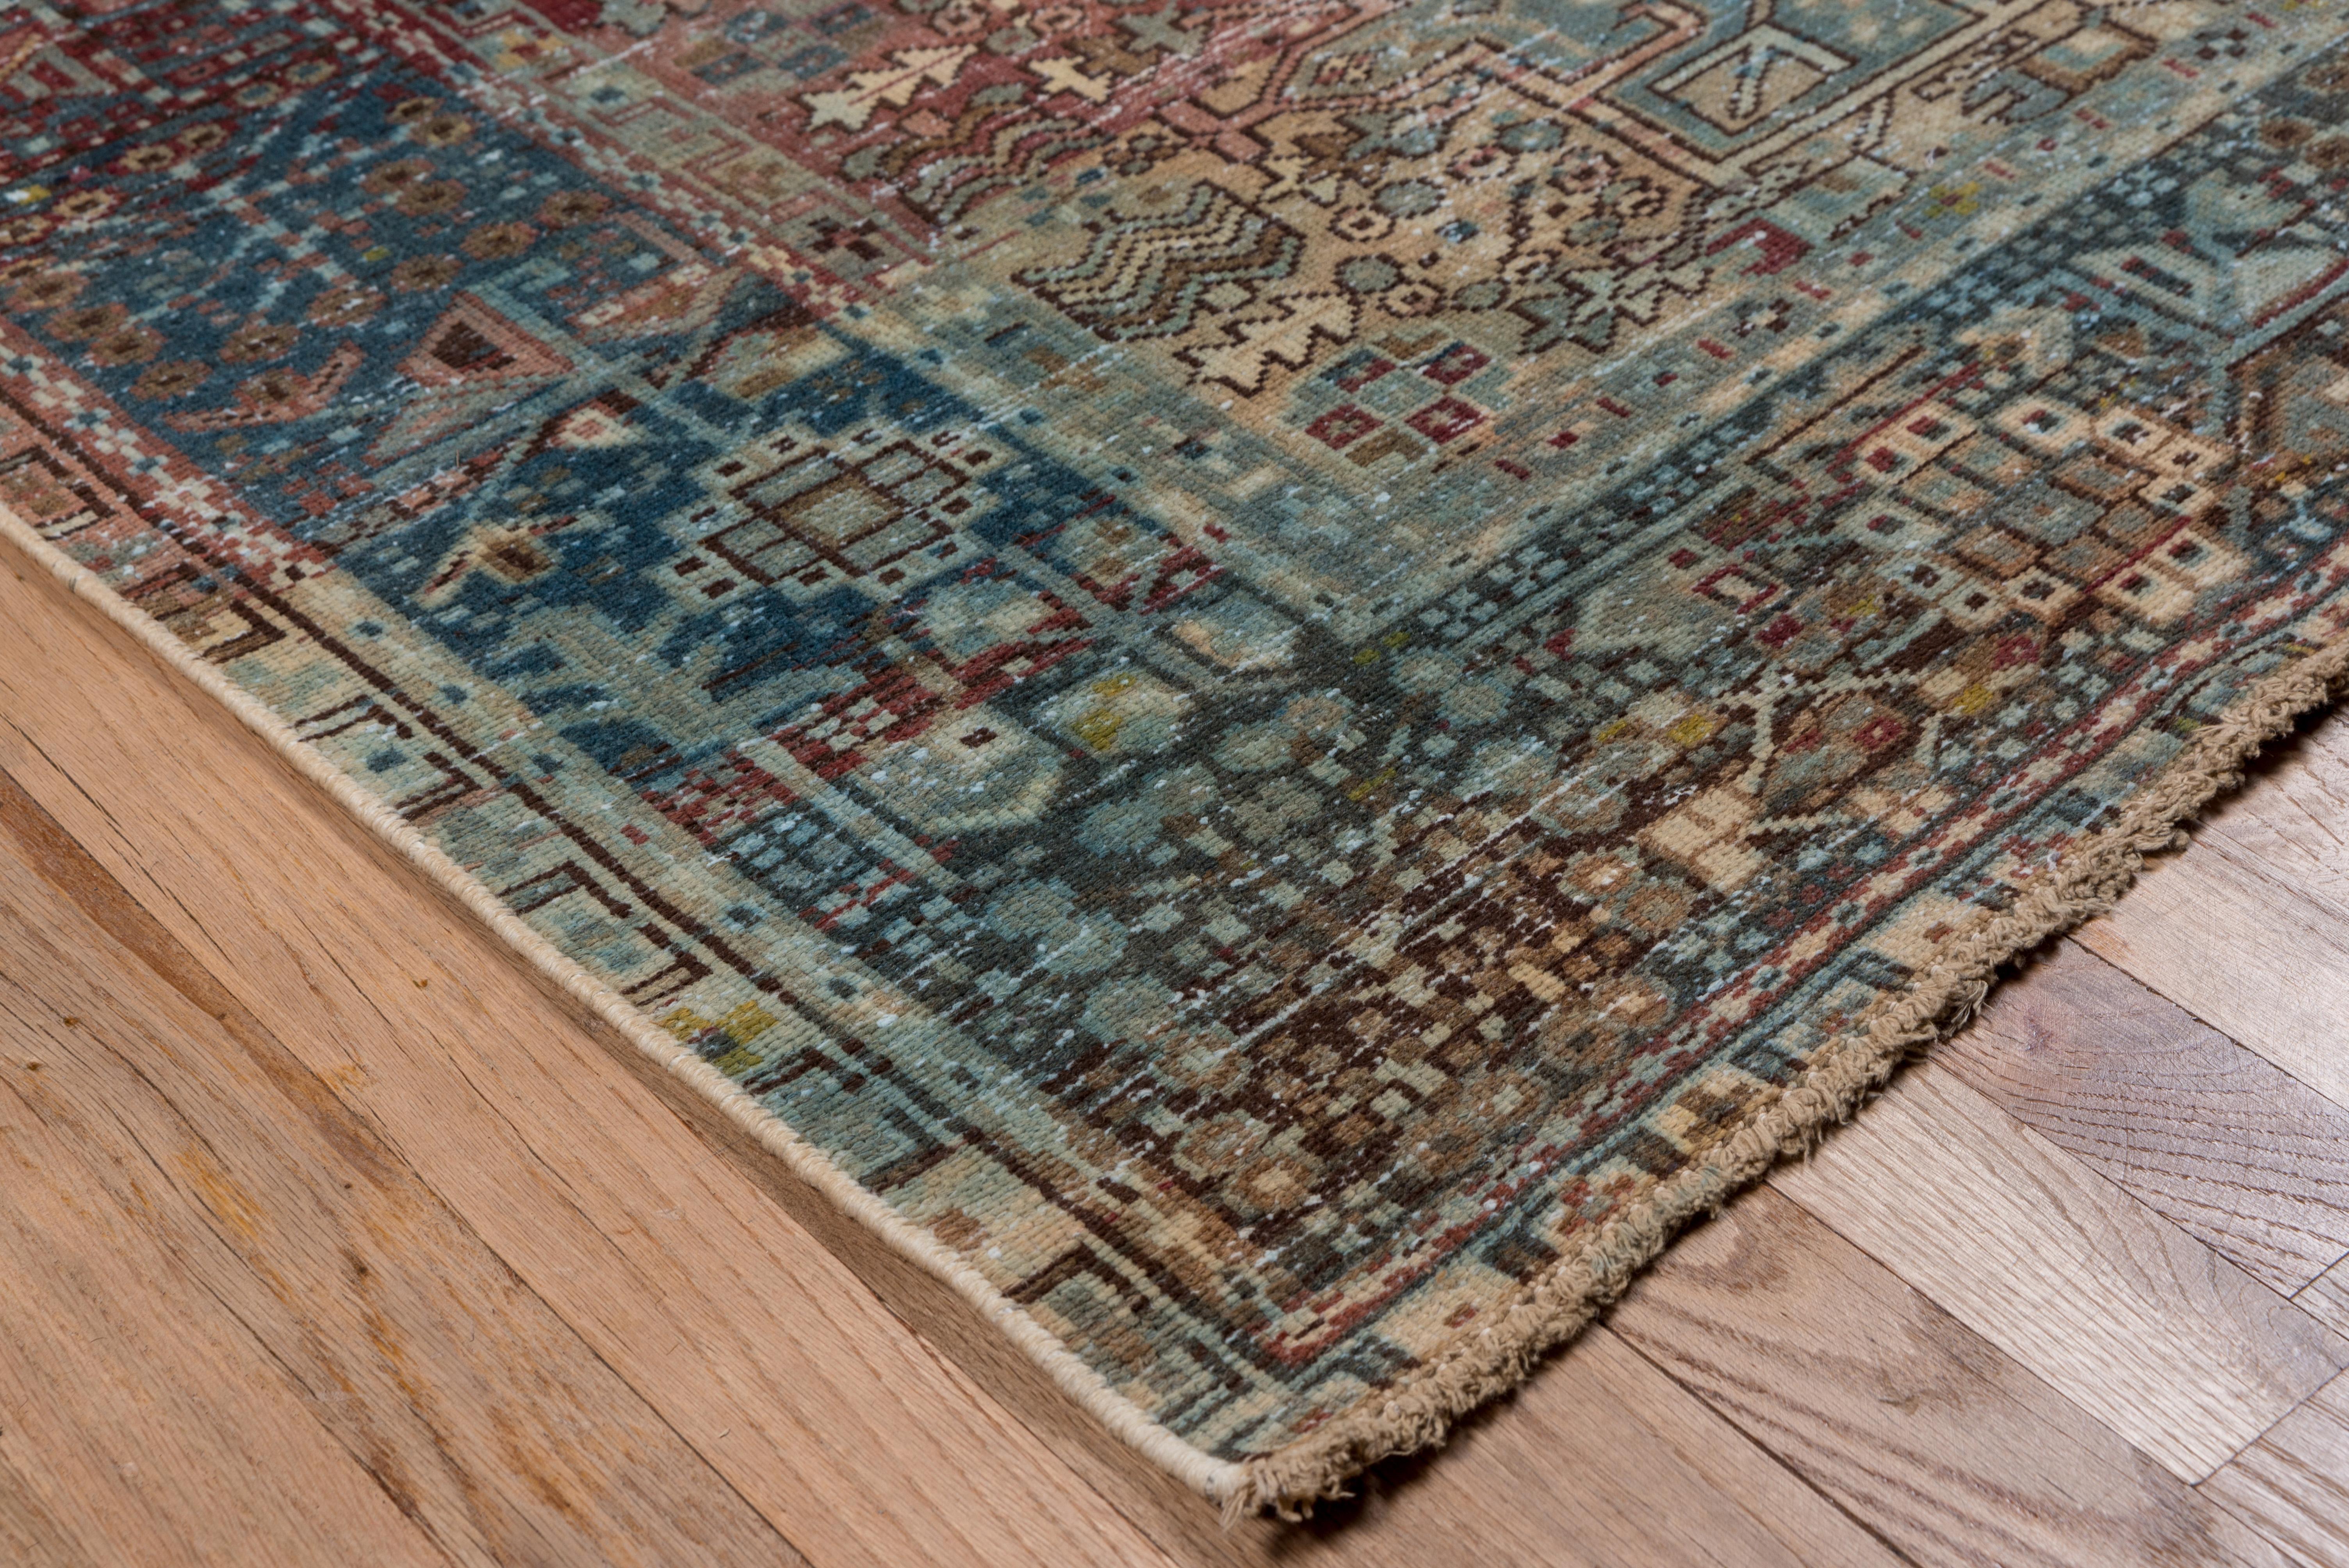 Karaje rugs are woven in the Northwest region of Iran. They’re known for their durable wool quality, and geometric designs. They have a heavy influence on the geometry of Caucasian rugs of Caucasus which is just North of Iran. All Caucasian rugs are